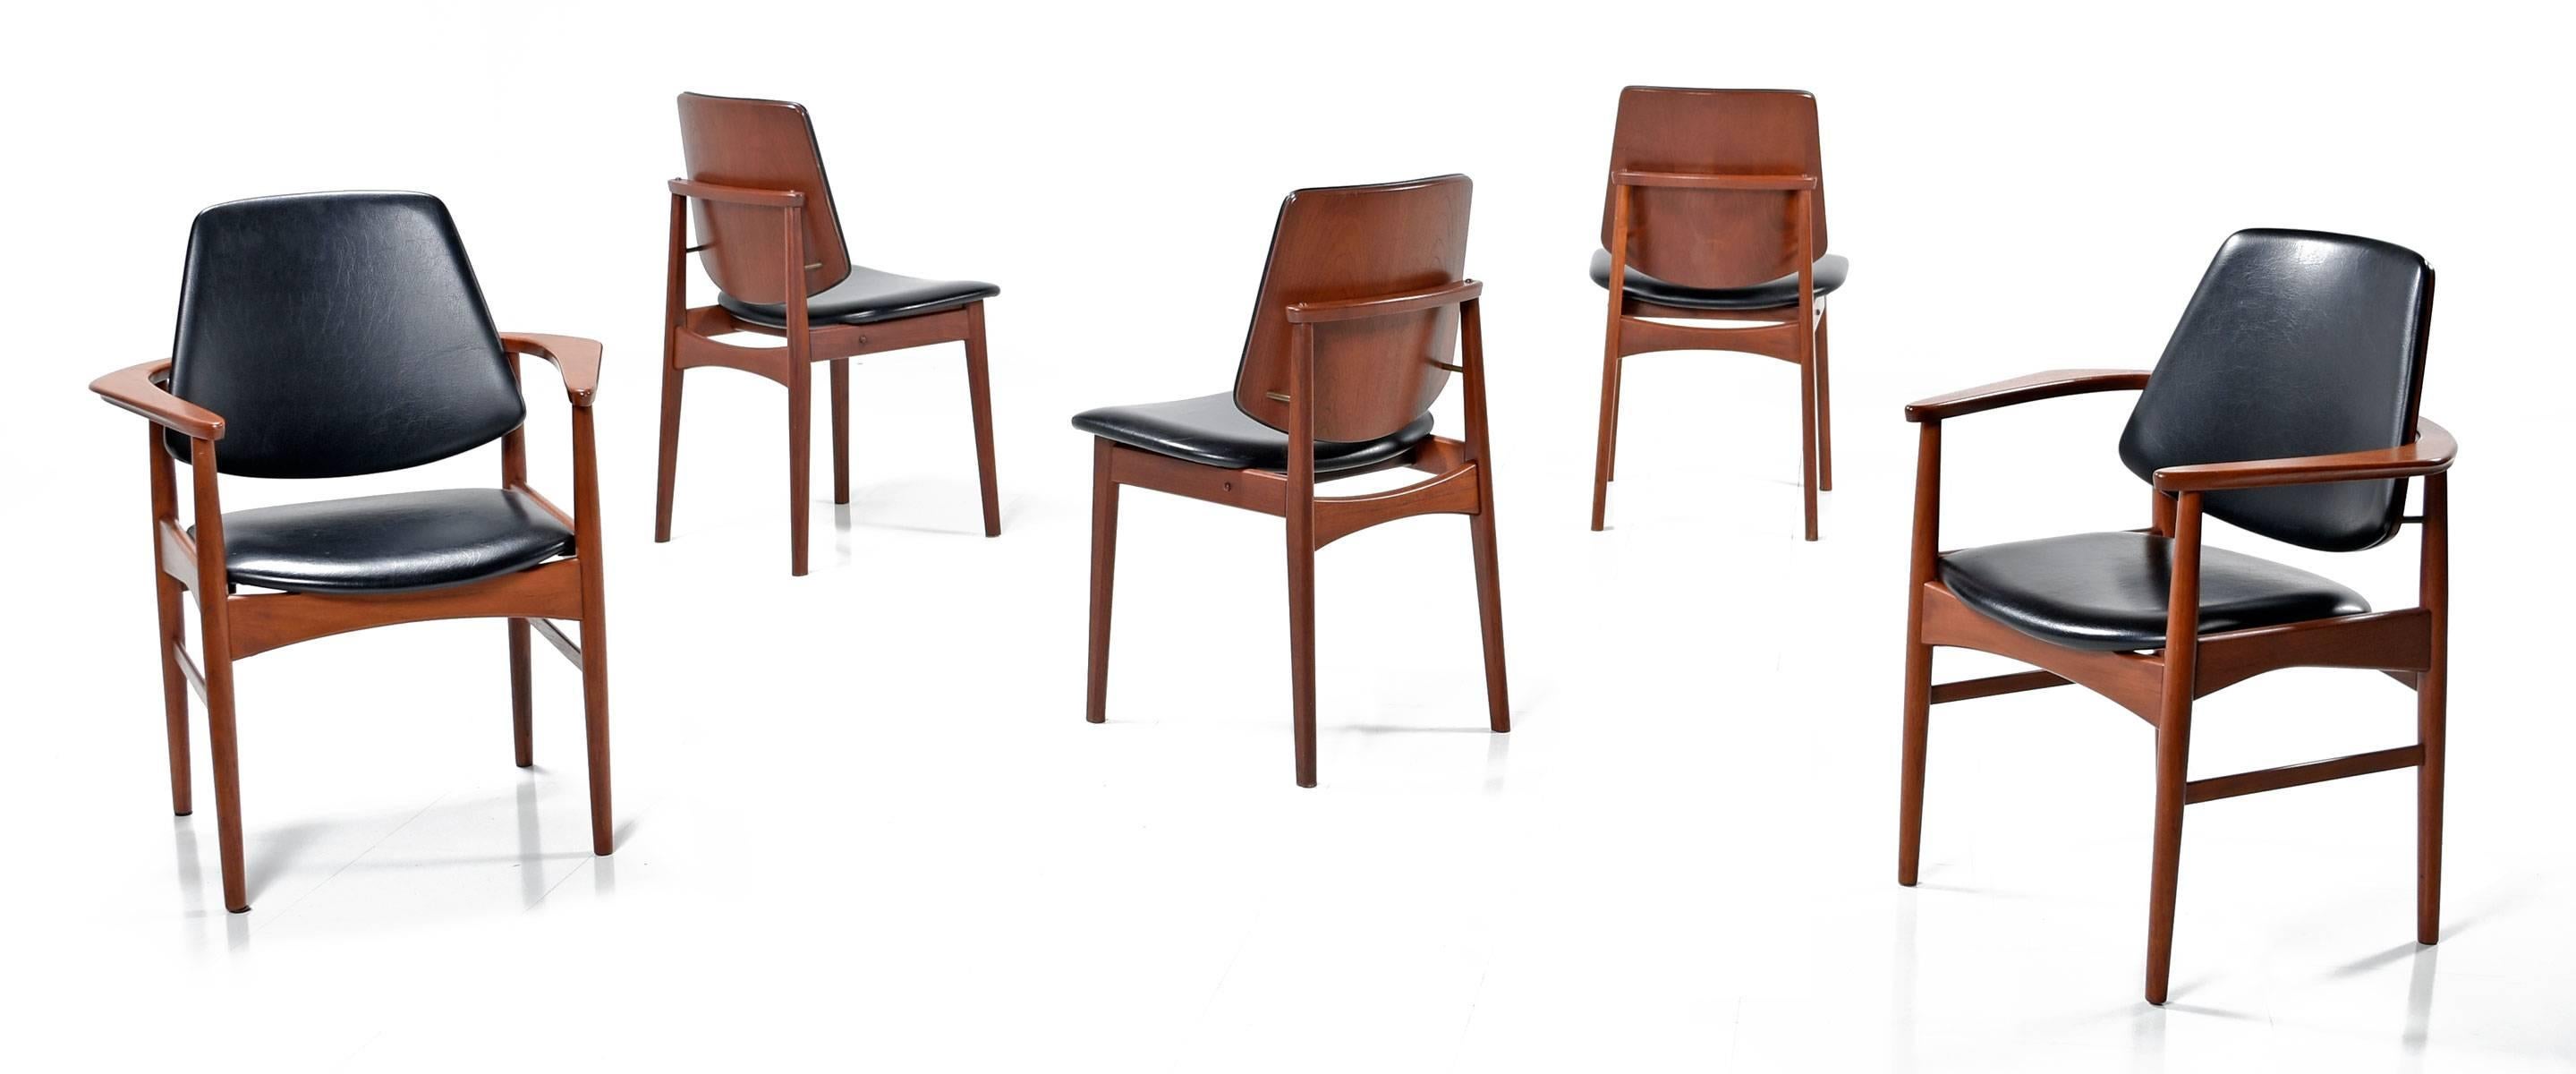 Outstanding set of five Danish teak Hovmand Olsen dining chairs. Superior quality and design by Arne Hovmand-Olsen. Set includes two arm chairs and three armless side chairs. The chairs feature their original black naugahyde upholstery. The solid